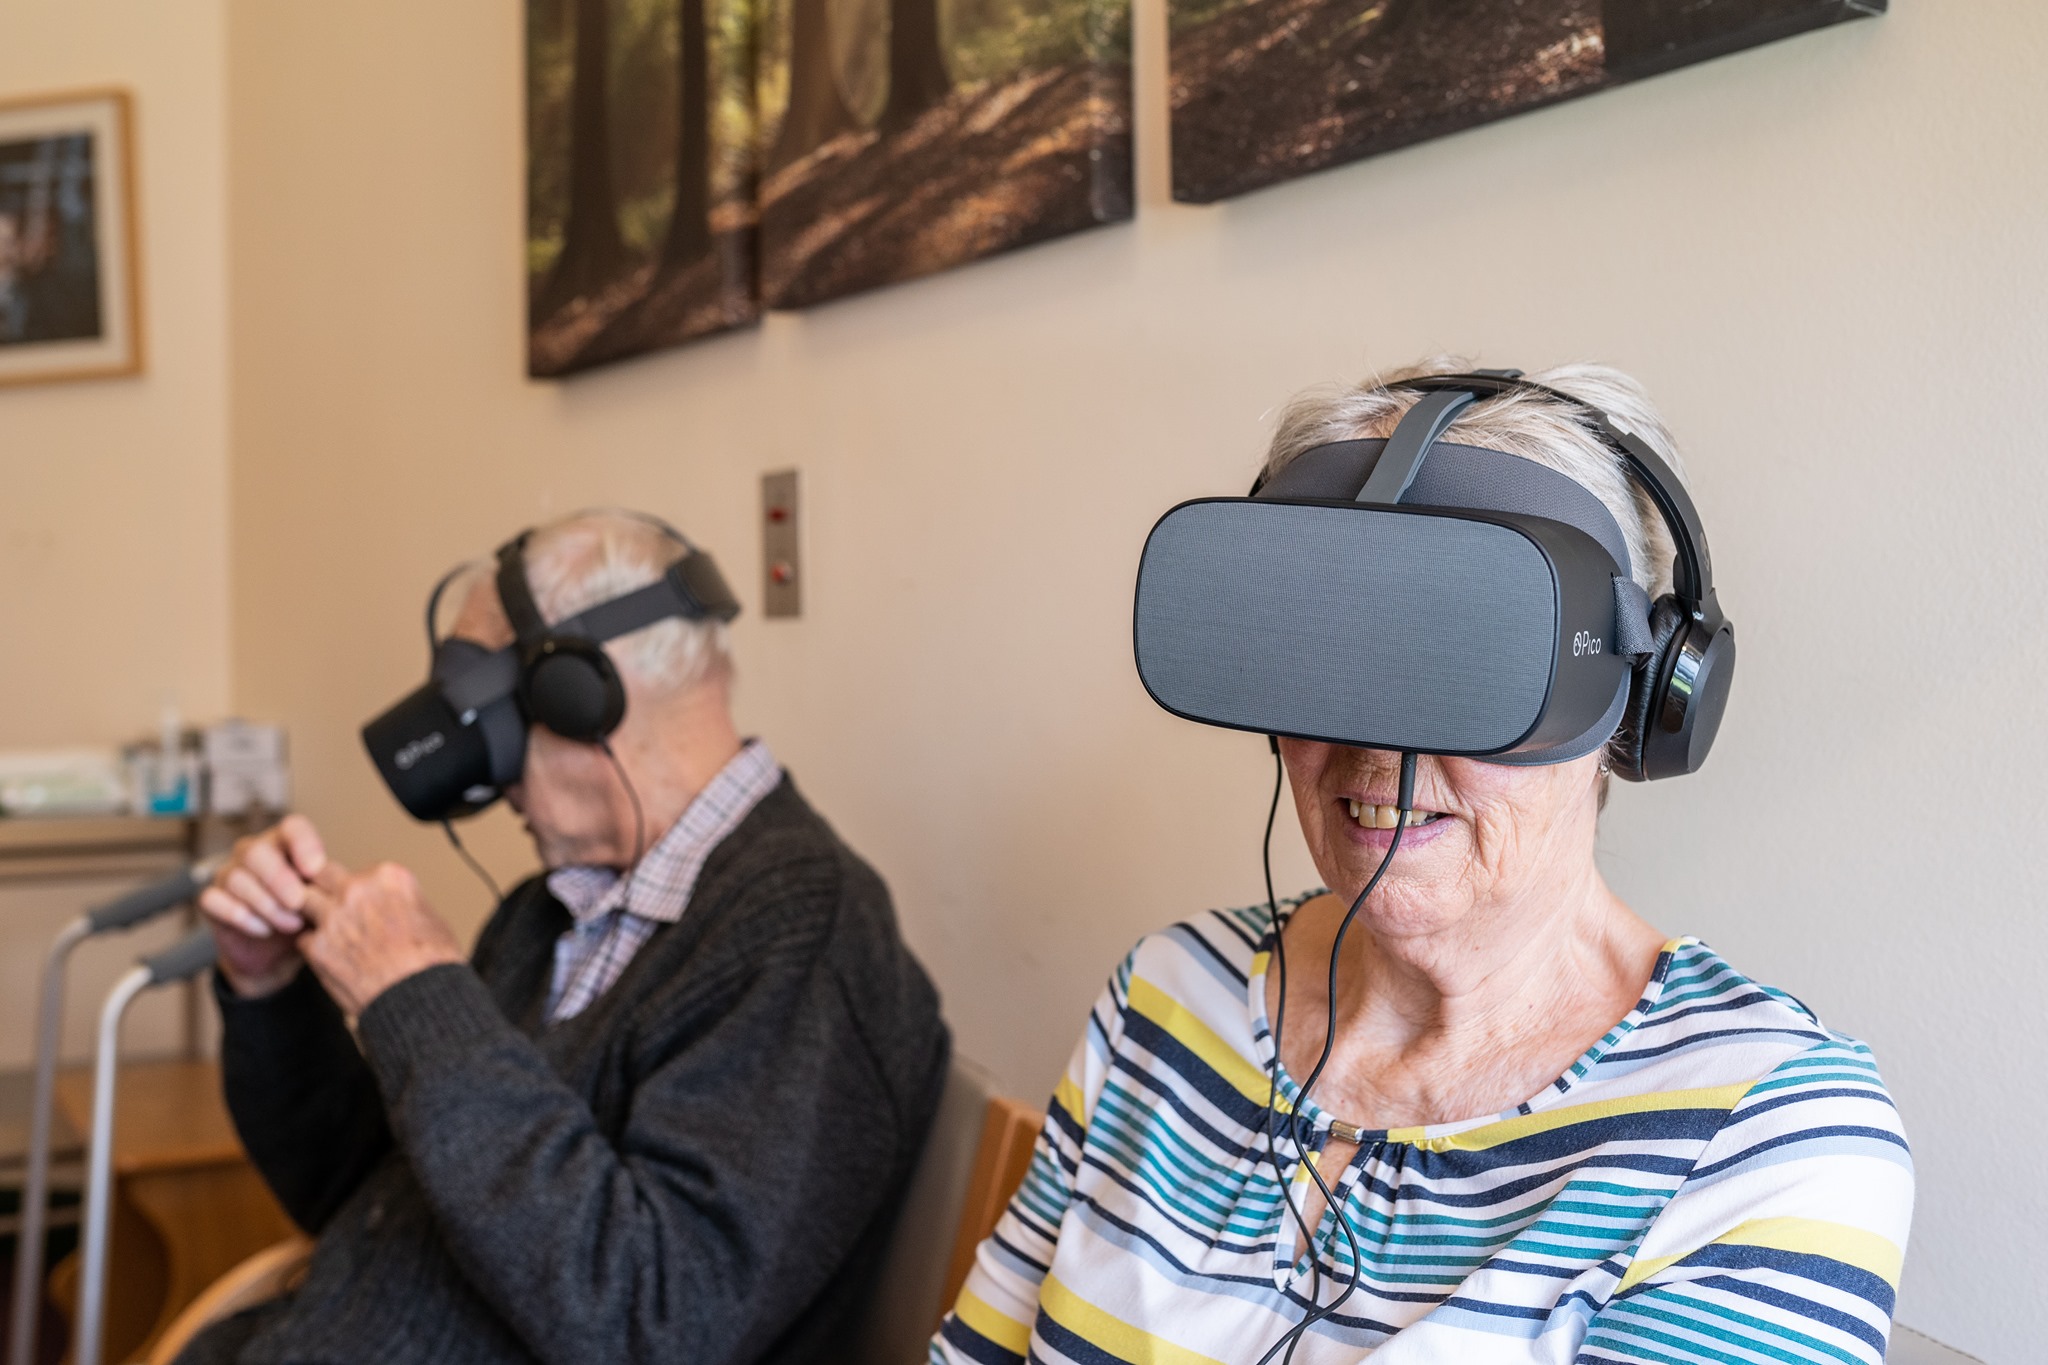 A man and woman seated in a room swearing VR headsets,